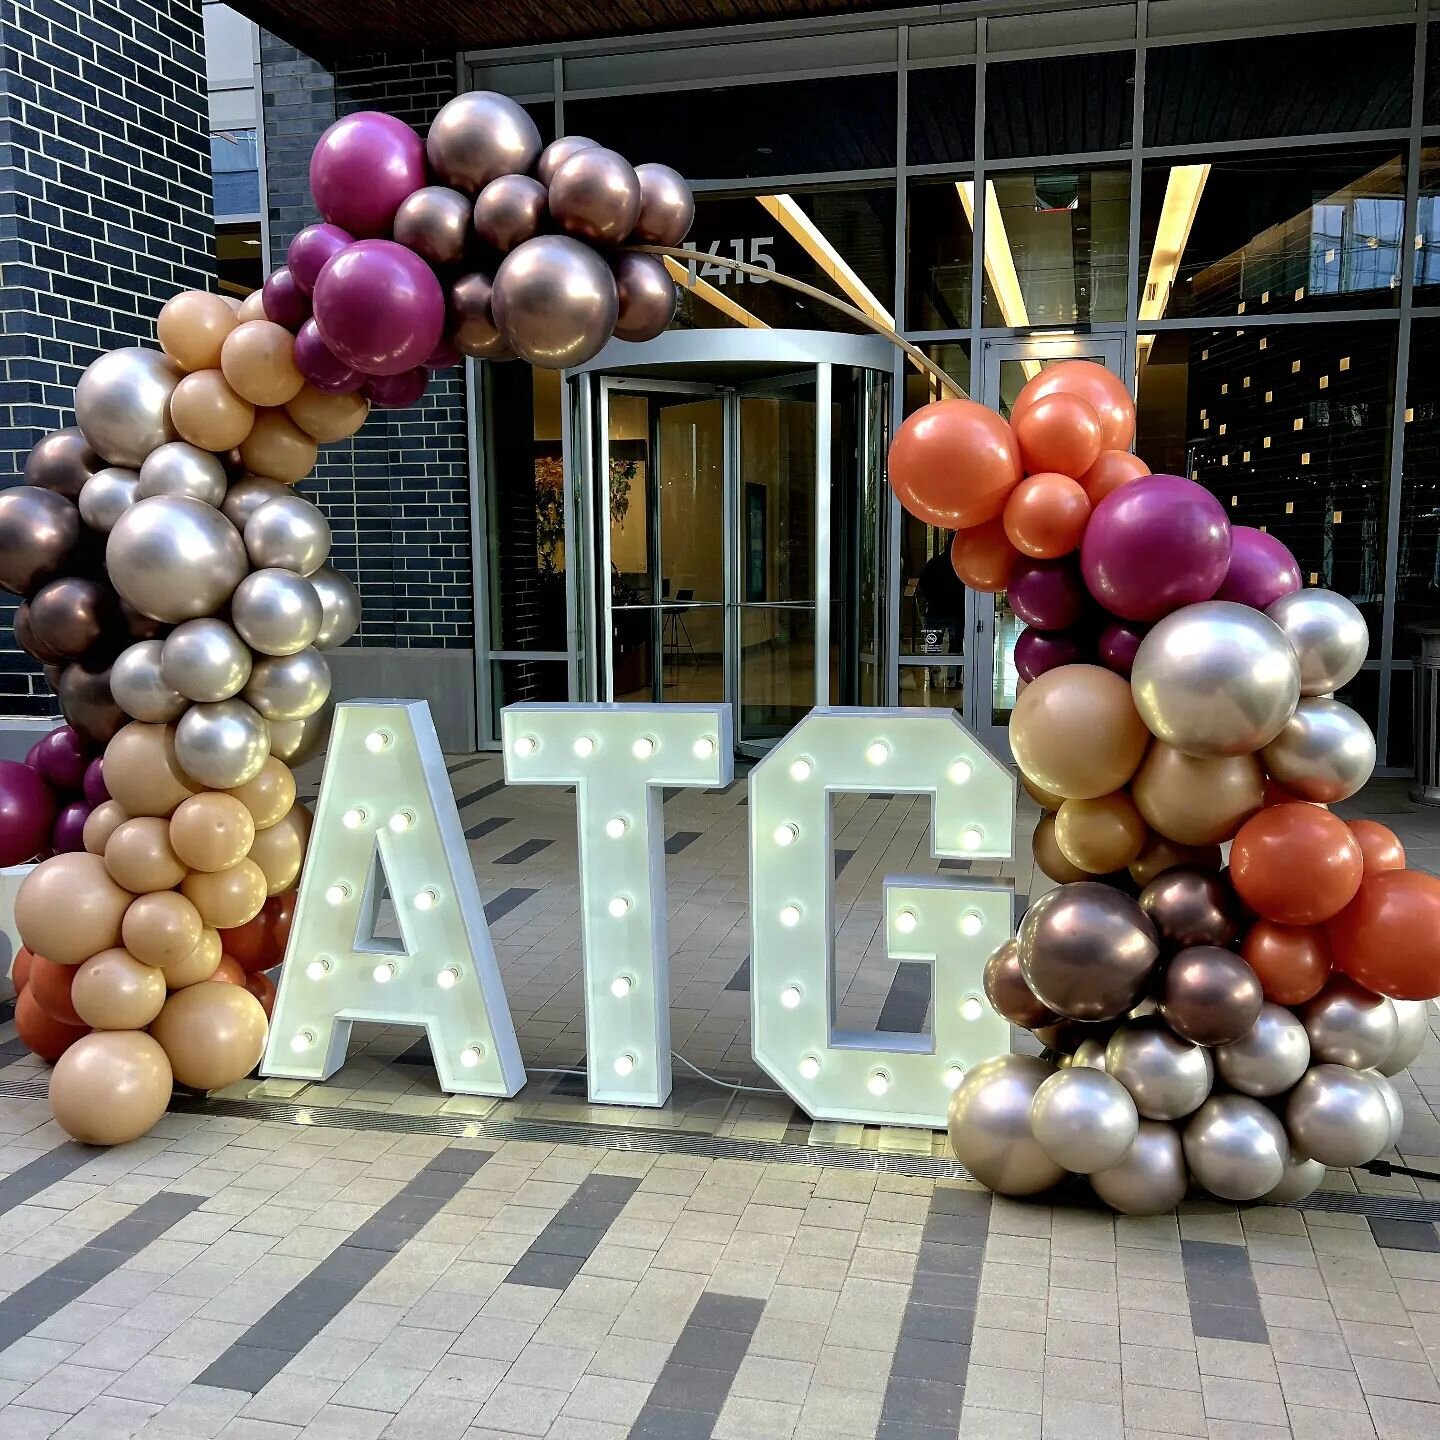 Happy Grand Opening Armstrong Transport Group! 🎉🎉🎉 @atgfr8  The Armstrong network connects shippers, carrier partners, and freight agents. Thank you for allowing us to celebrate with you guys! 🫡

Balloons by @confetticastle 

#qclights #marqueele